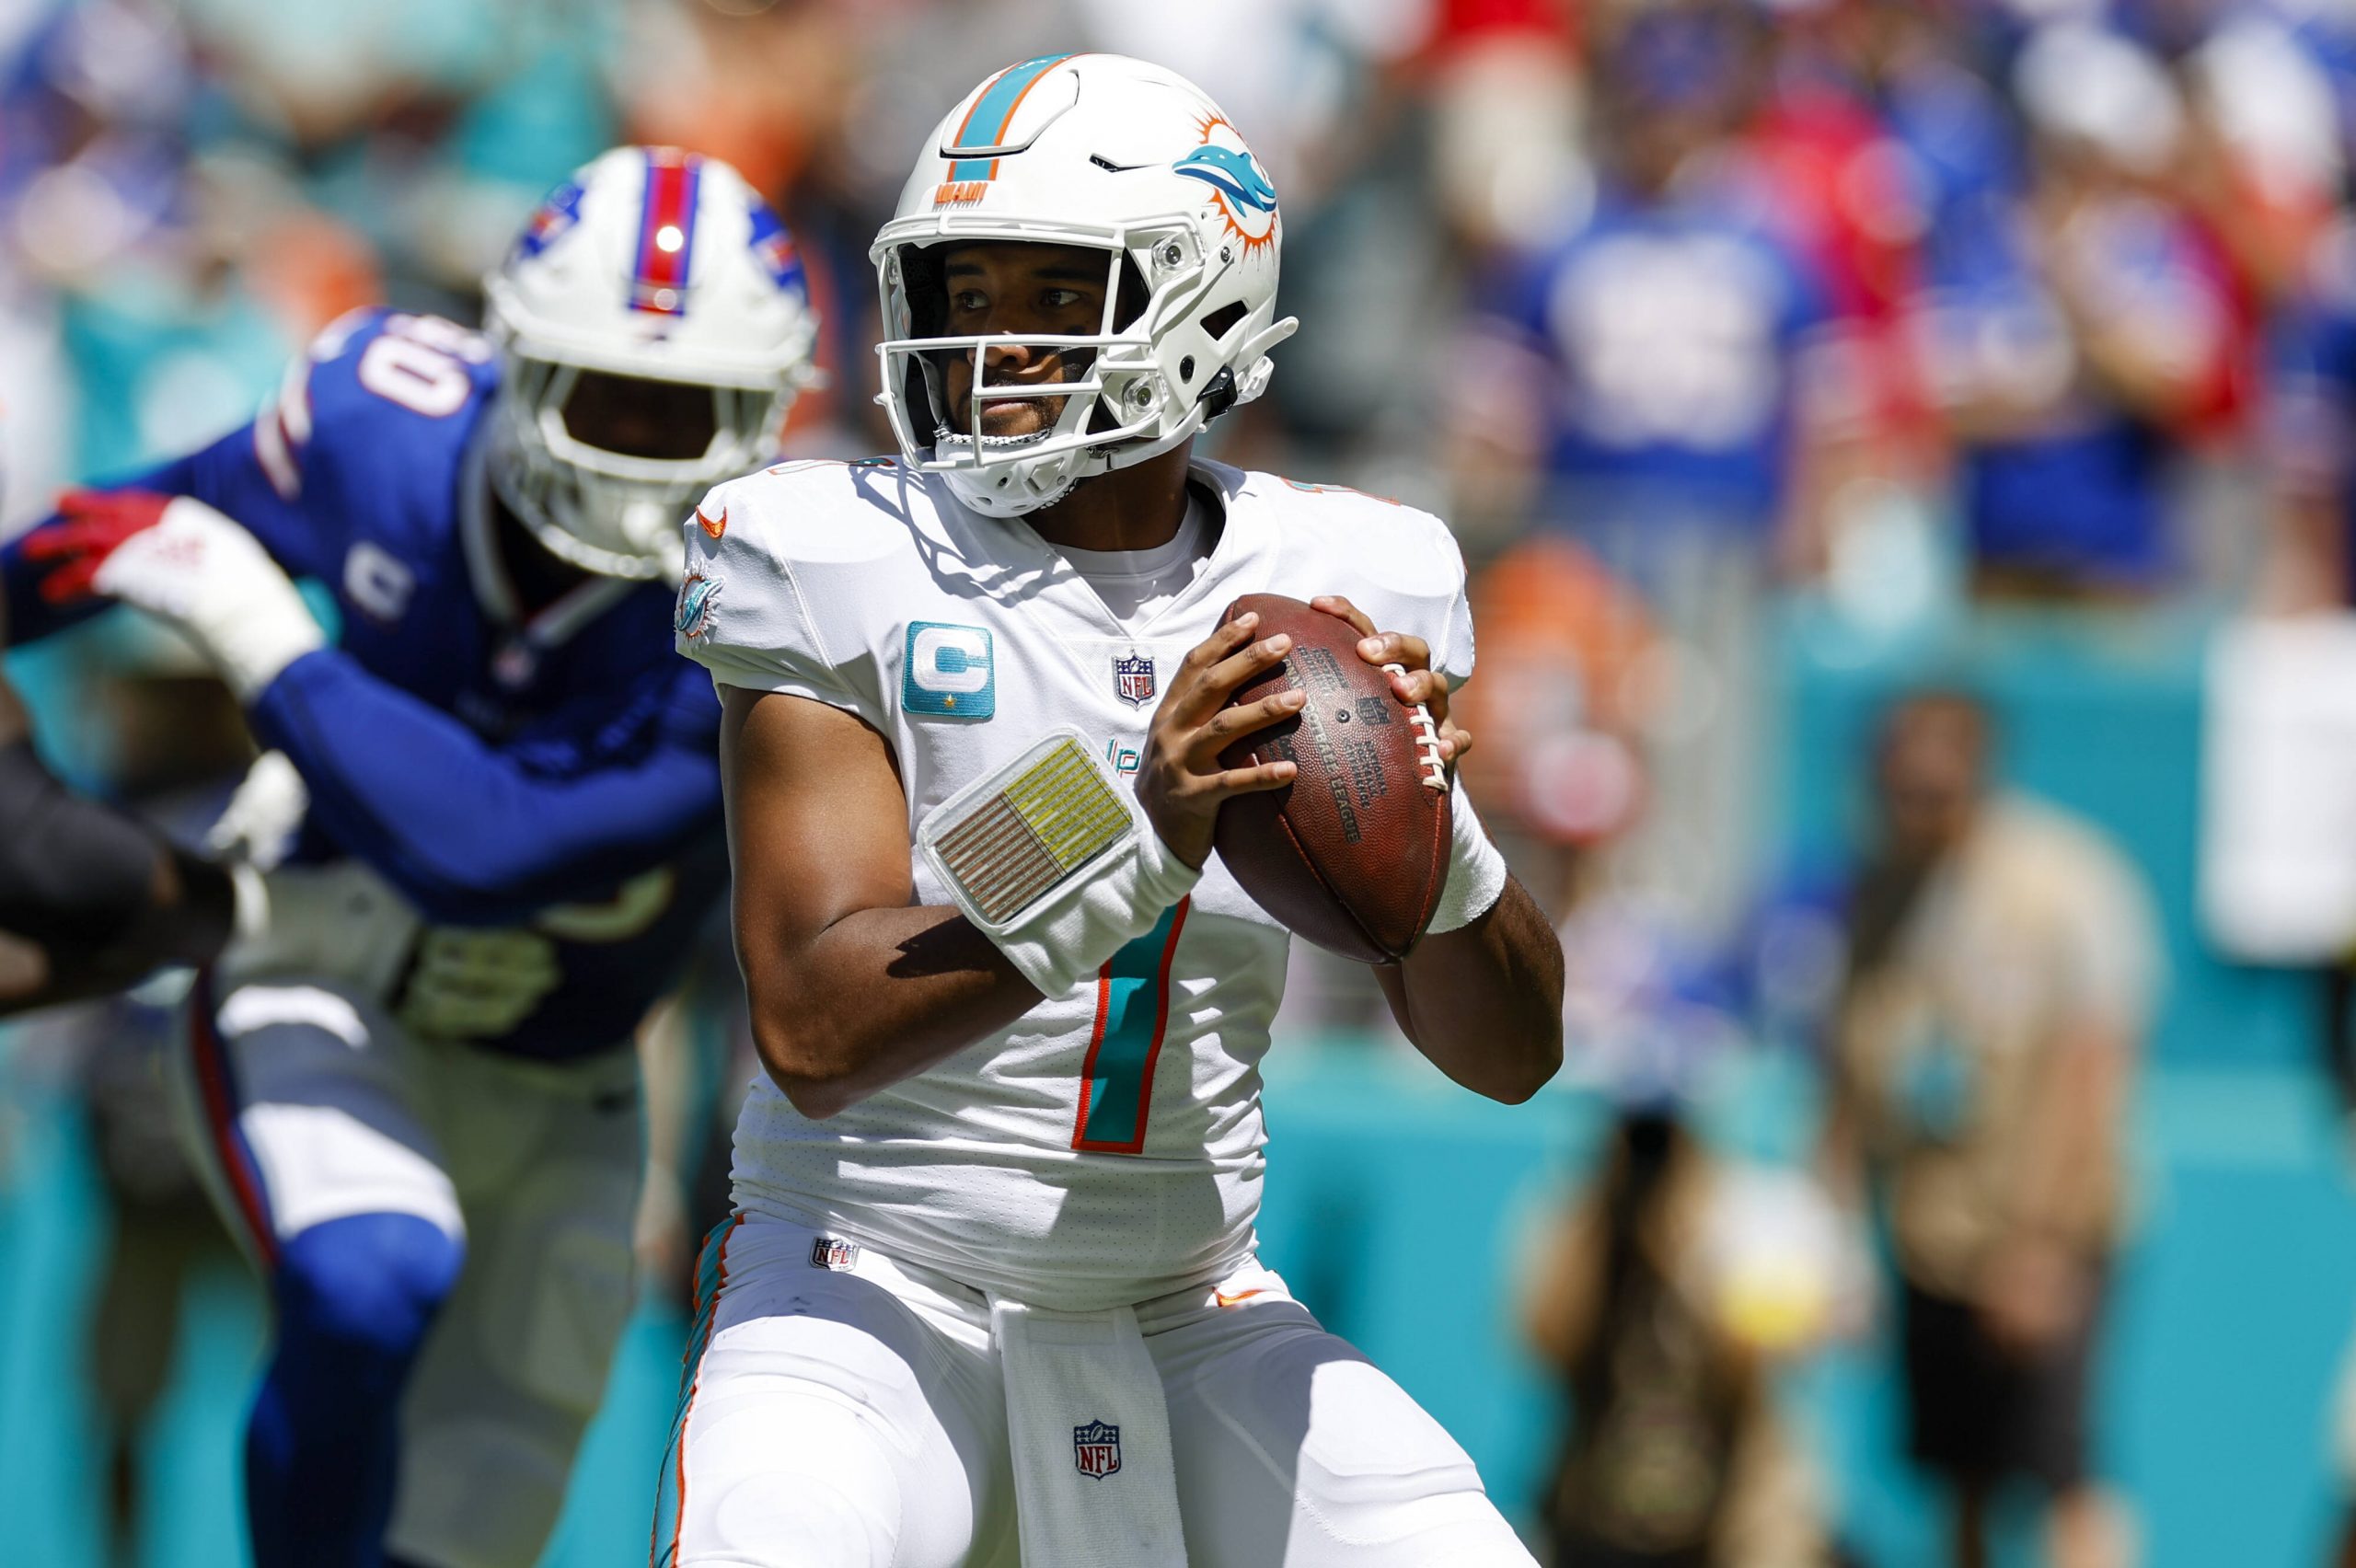 MIAMI GARDENS, FL - SEPTEMBER 25: Miami Dolphins quarterback Tua Tagovailoa 1 throws a pass during the game between the Buffalo Bills and the Miami Dolphins on September 25, 2022 at Hard Rock Stadium in Miami Gardens, Fl. Photo by David Rosenblum/Icon Sportswire NFL, American Football Herren, USA SEP 25 Bills at Dolphins Icon220925221441